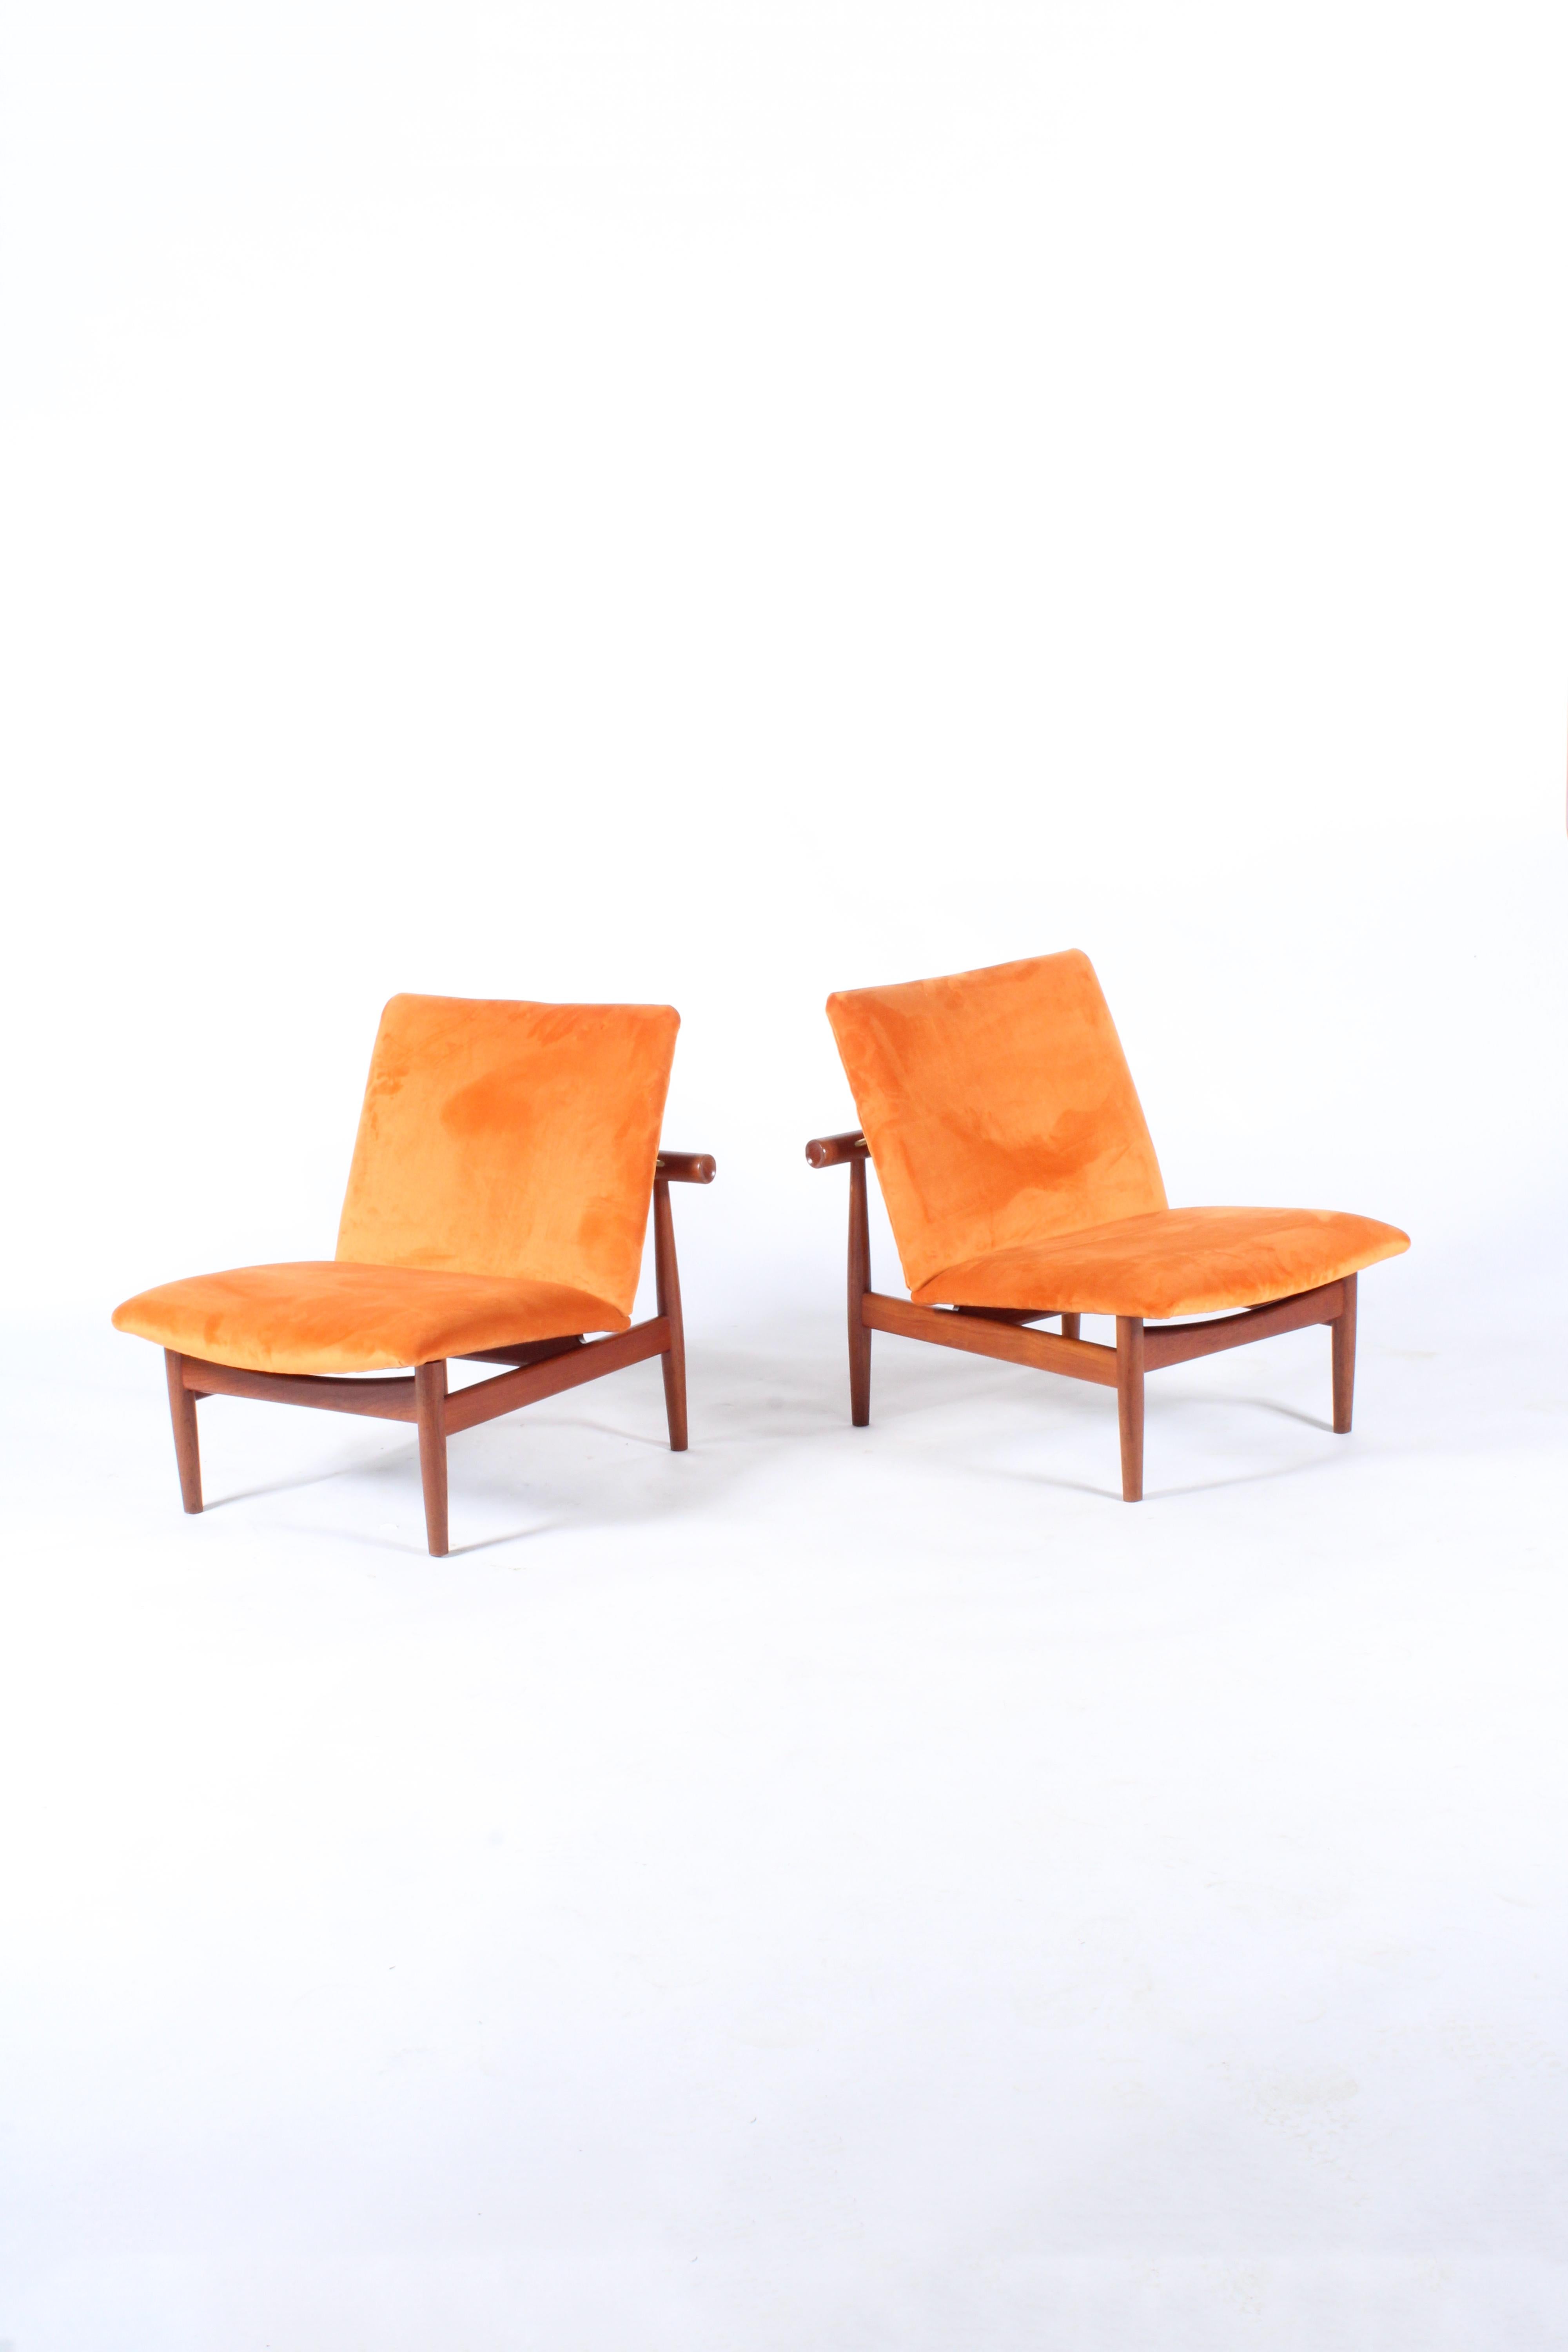 A rare opportunity to purchase a pair of original early edition Japan chairs by legendary Danish designer Finn Juhl. Sourced from a private collection in Paris we have had this beautiful pair professionally restored and refinished in a vibrant